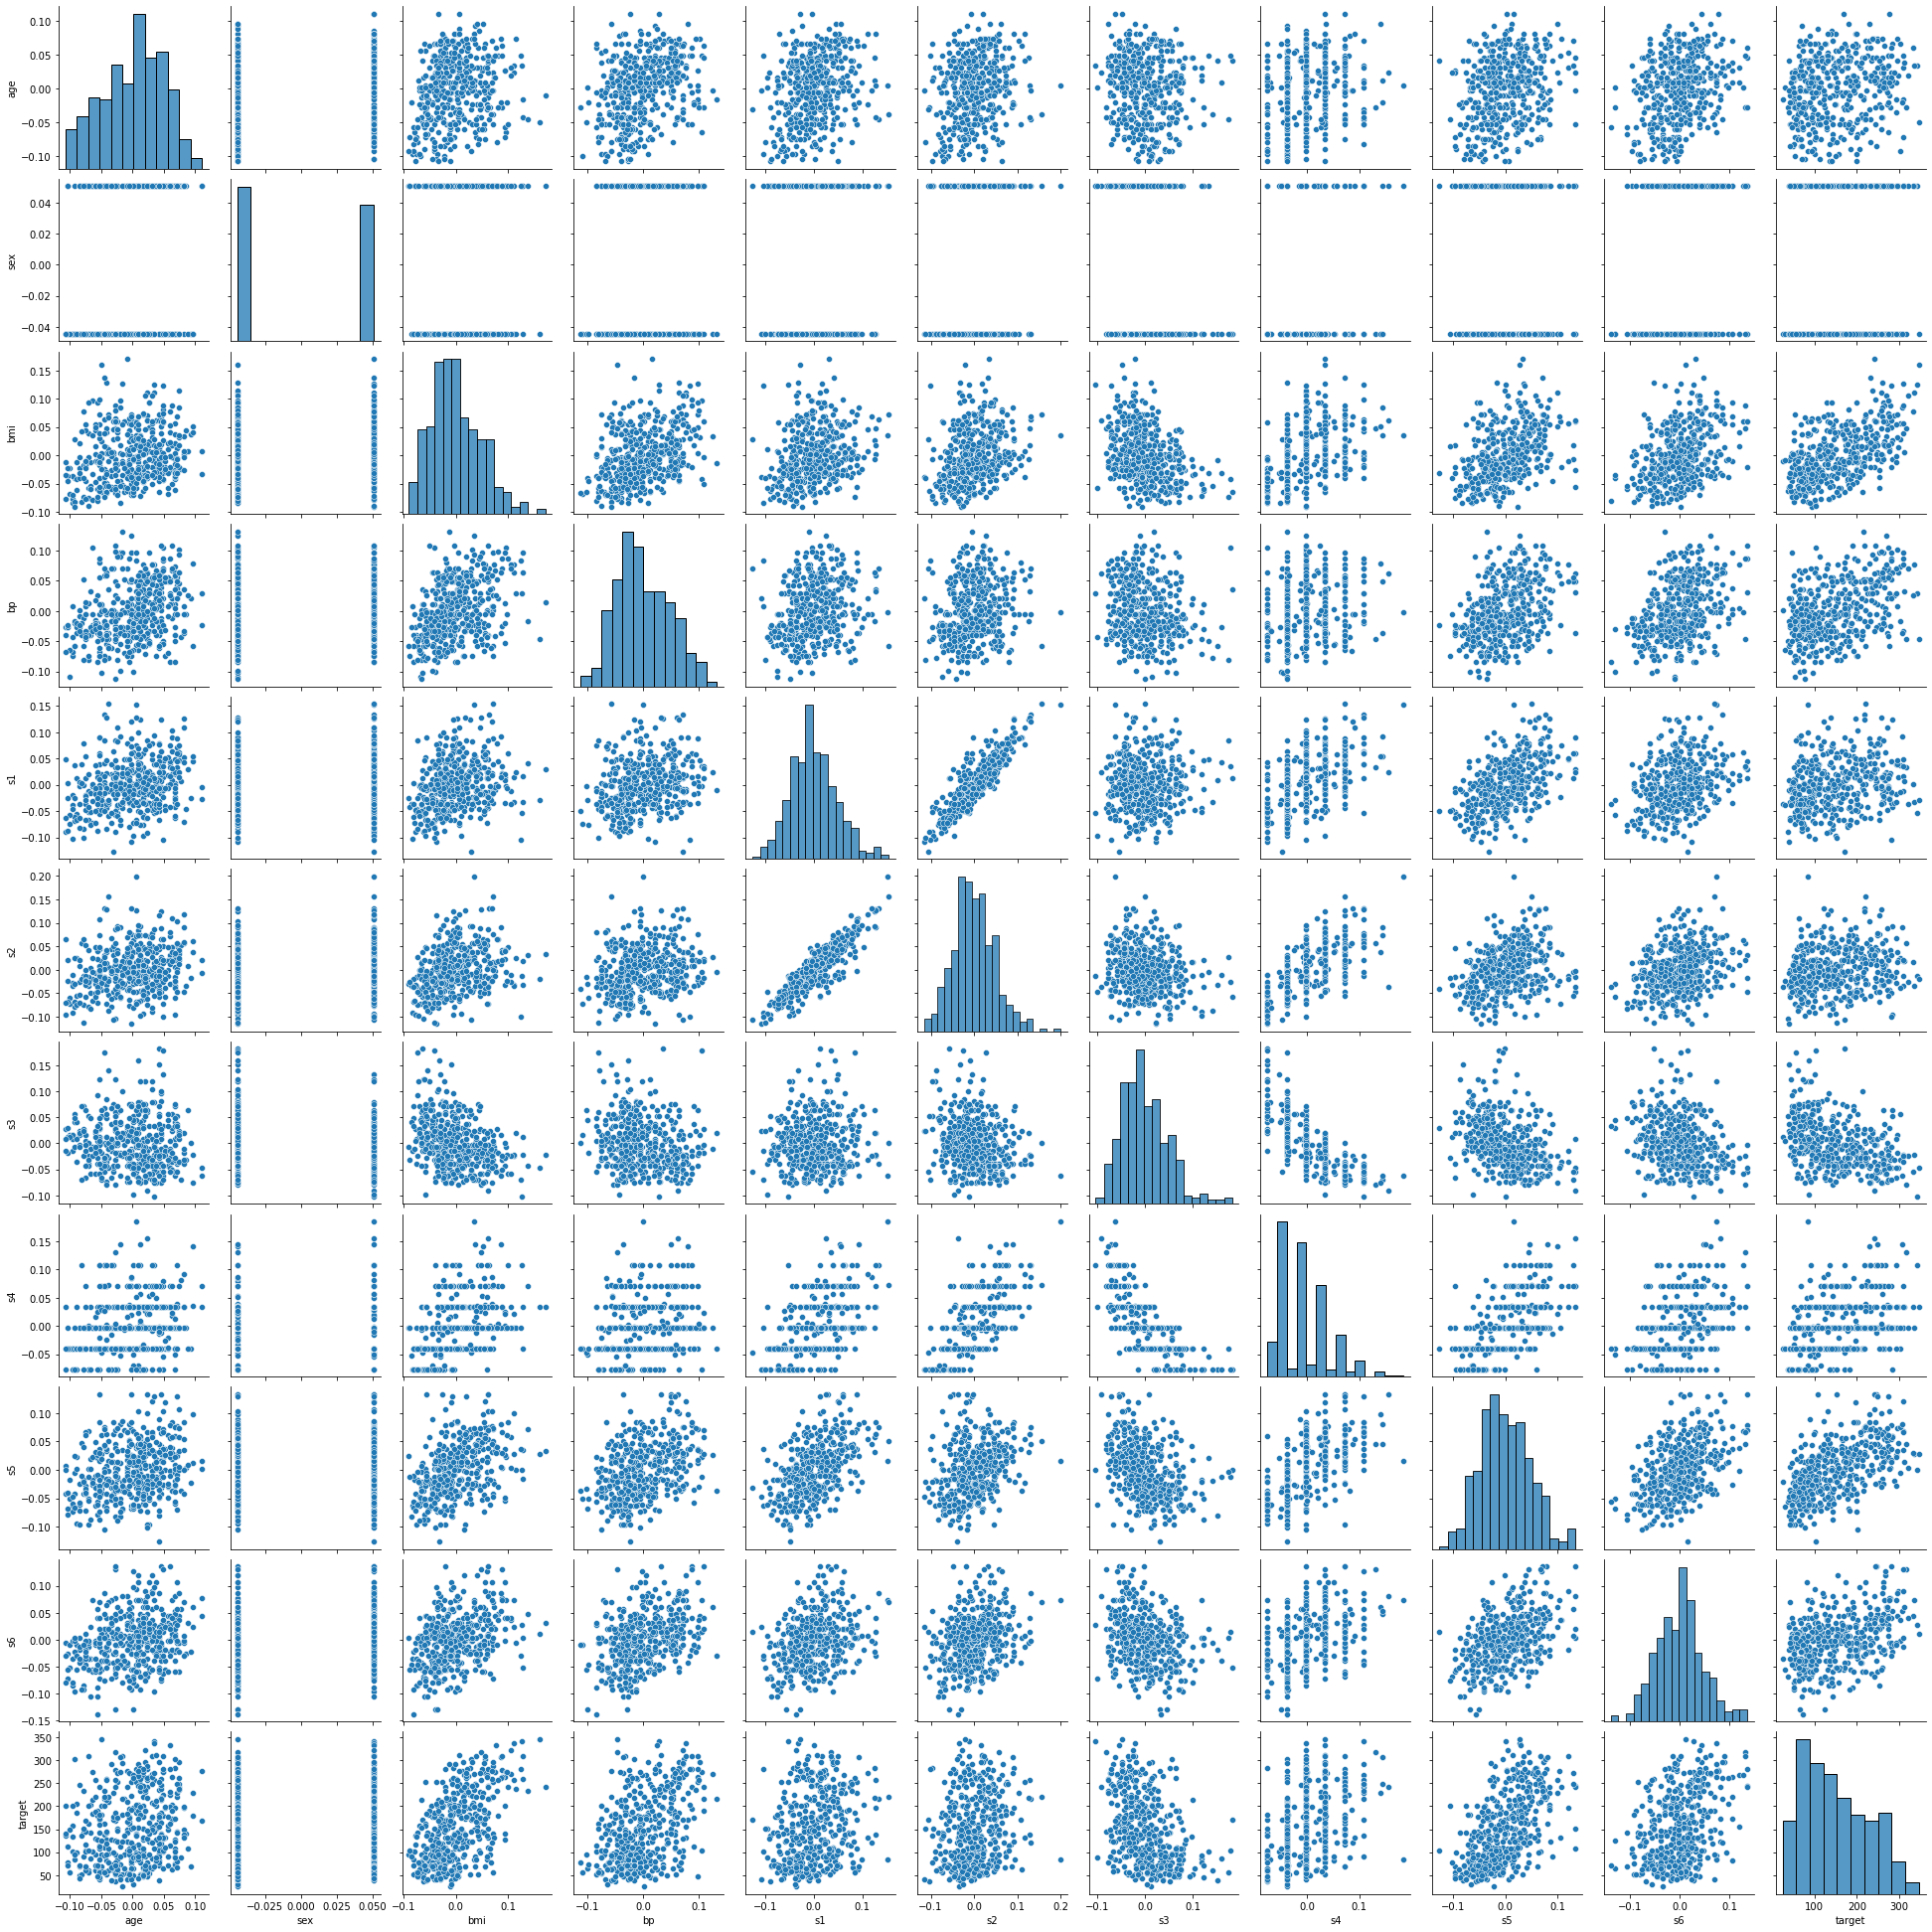 ../_images/examples_scatter_plots_5_1.png